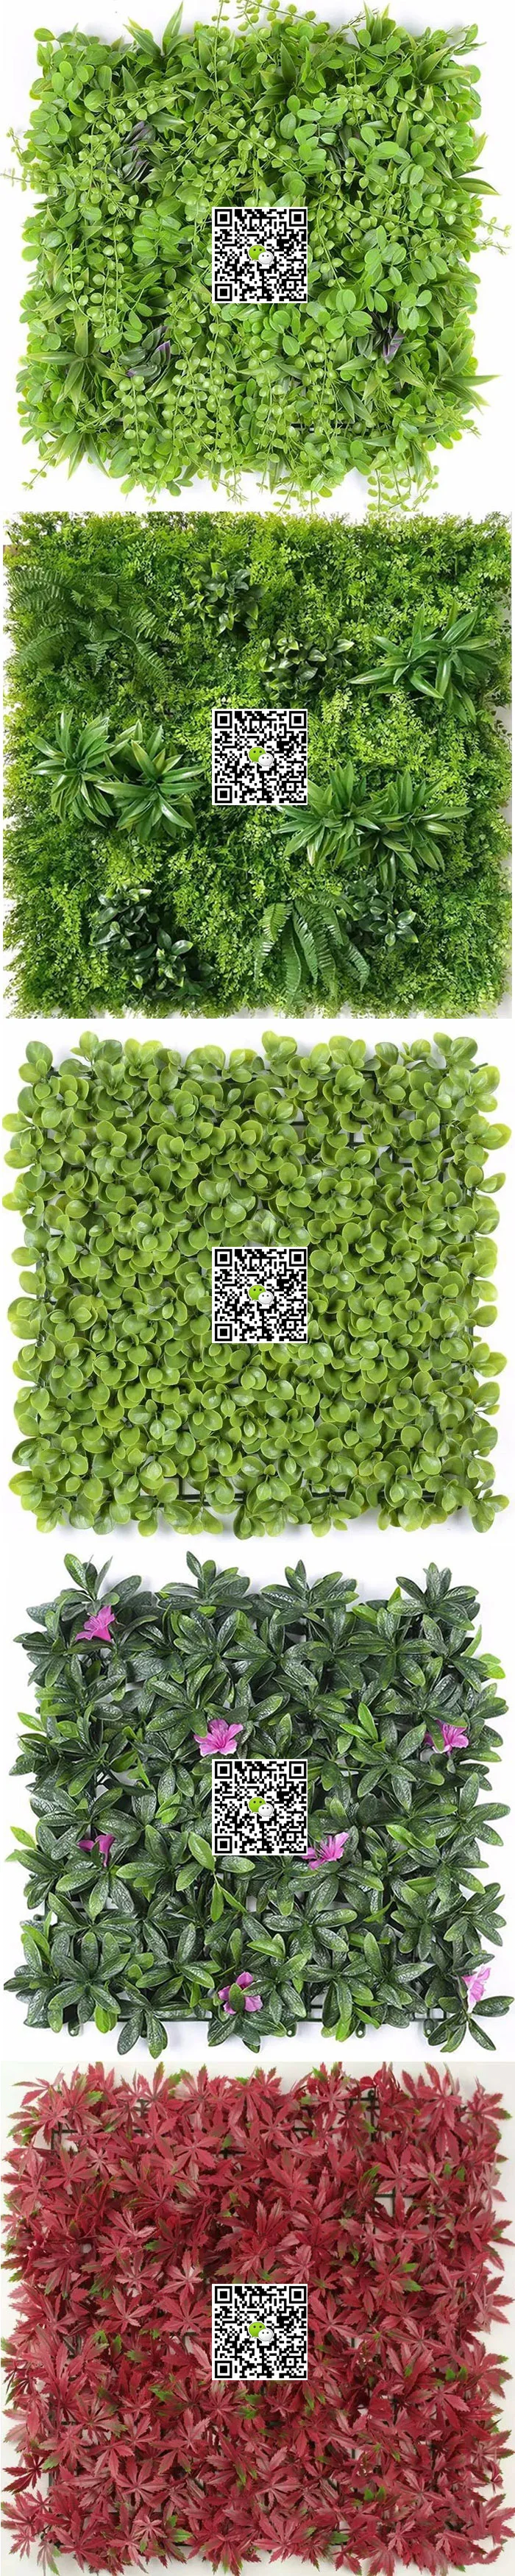 Artificial Boxwood Plastic IVY Green Wall Vertical Garden Fence for Interior Exterior Landscaping